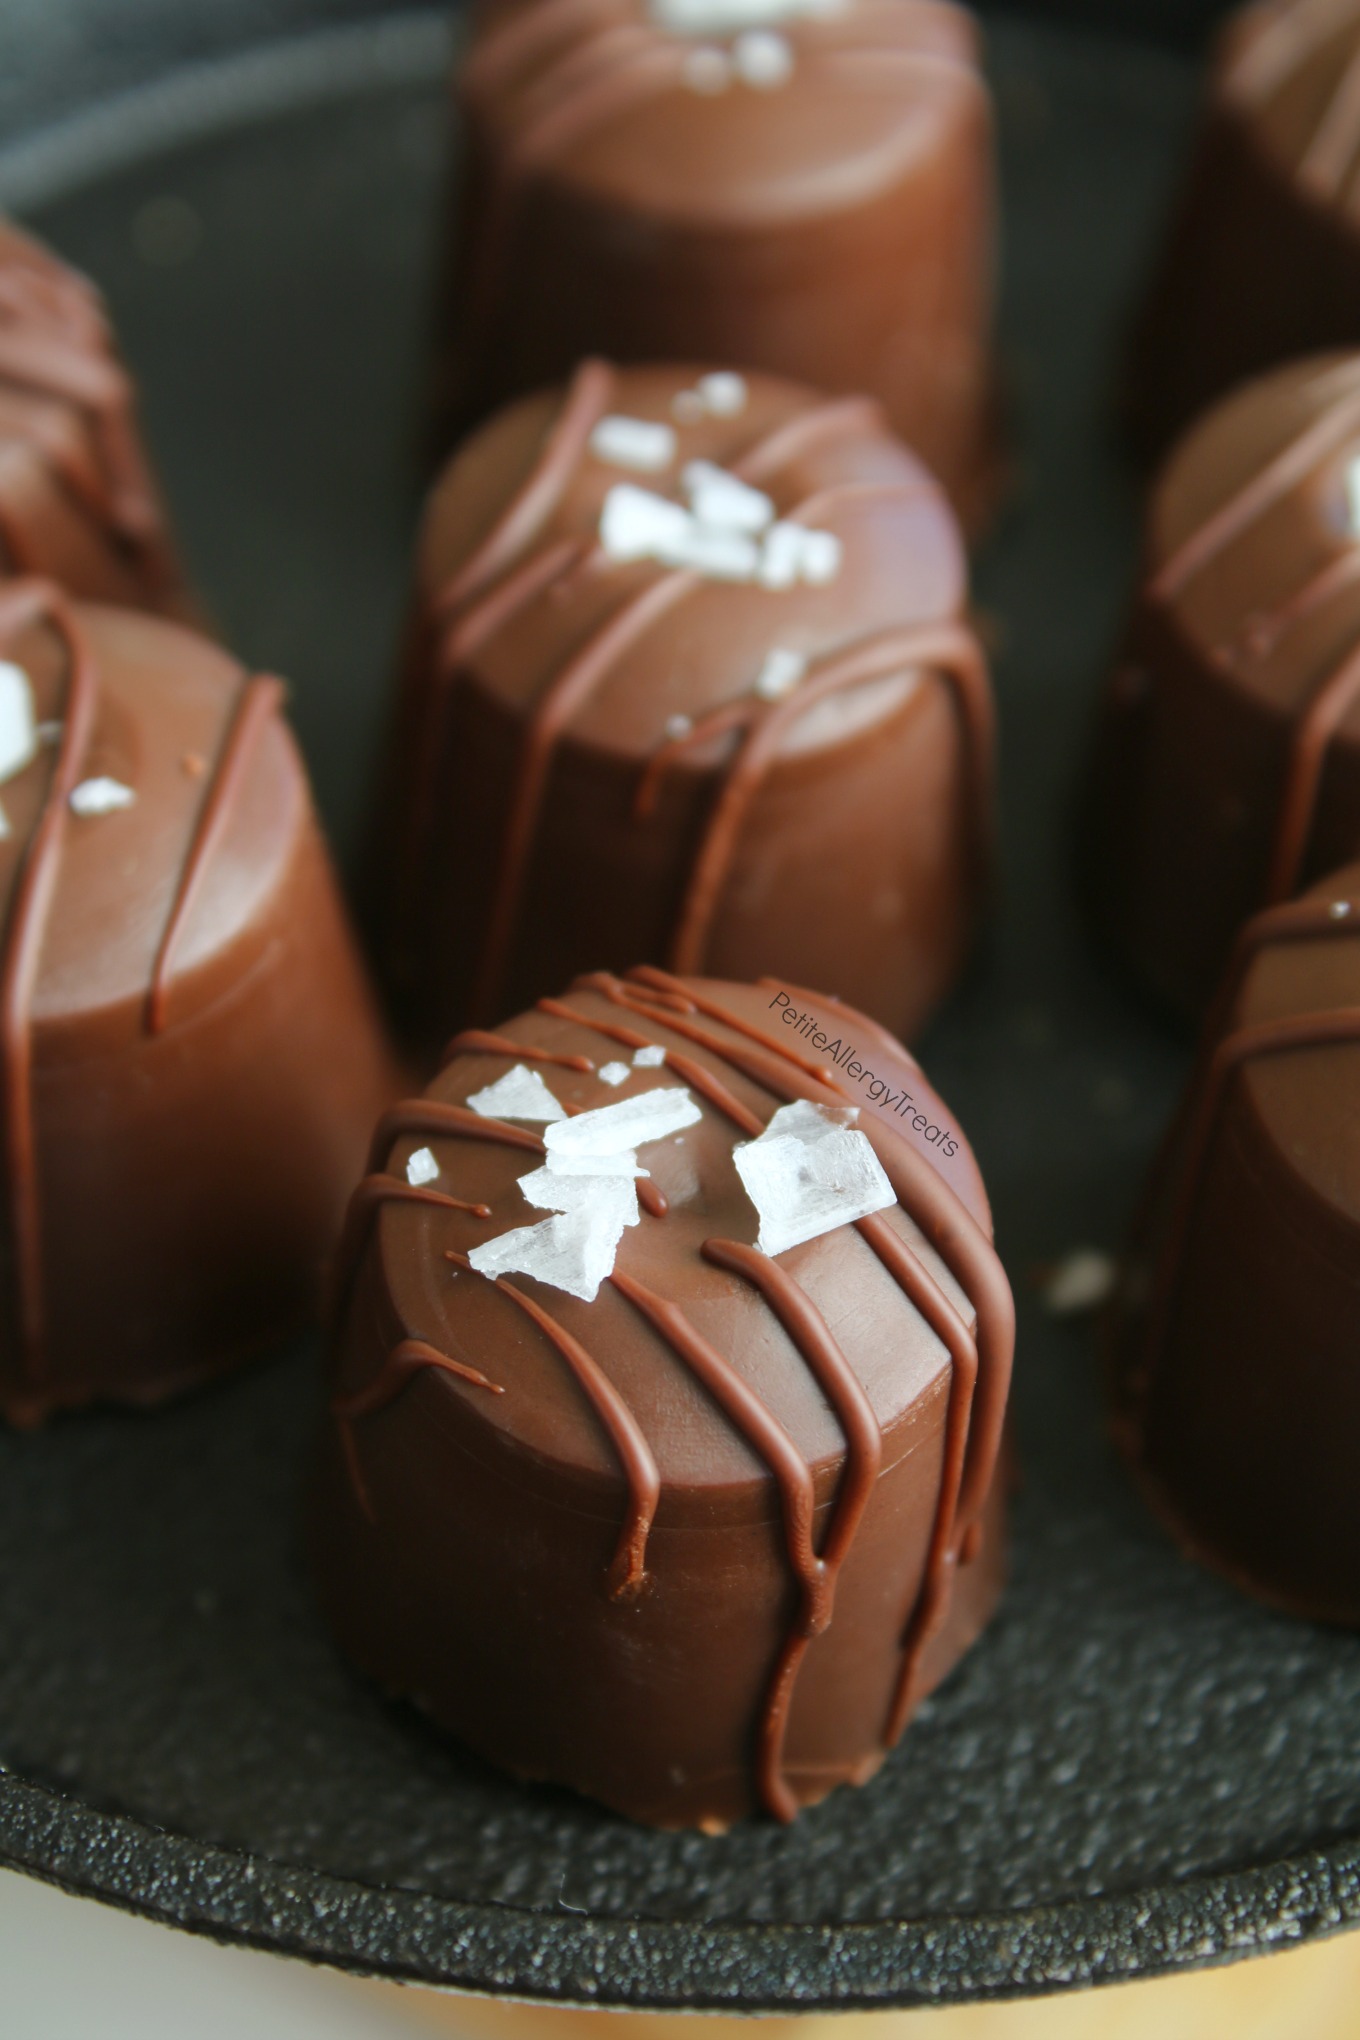 Chocolate Bombs- Toasted Coconut Truffles (Bon Bons) Recipe Dairy free vegan chocolate make these coconut chocolates food allergy friendly. Perfect for parties!